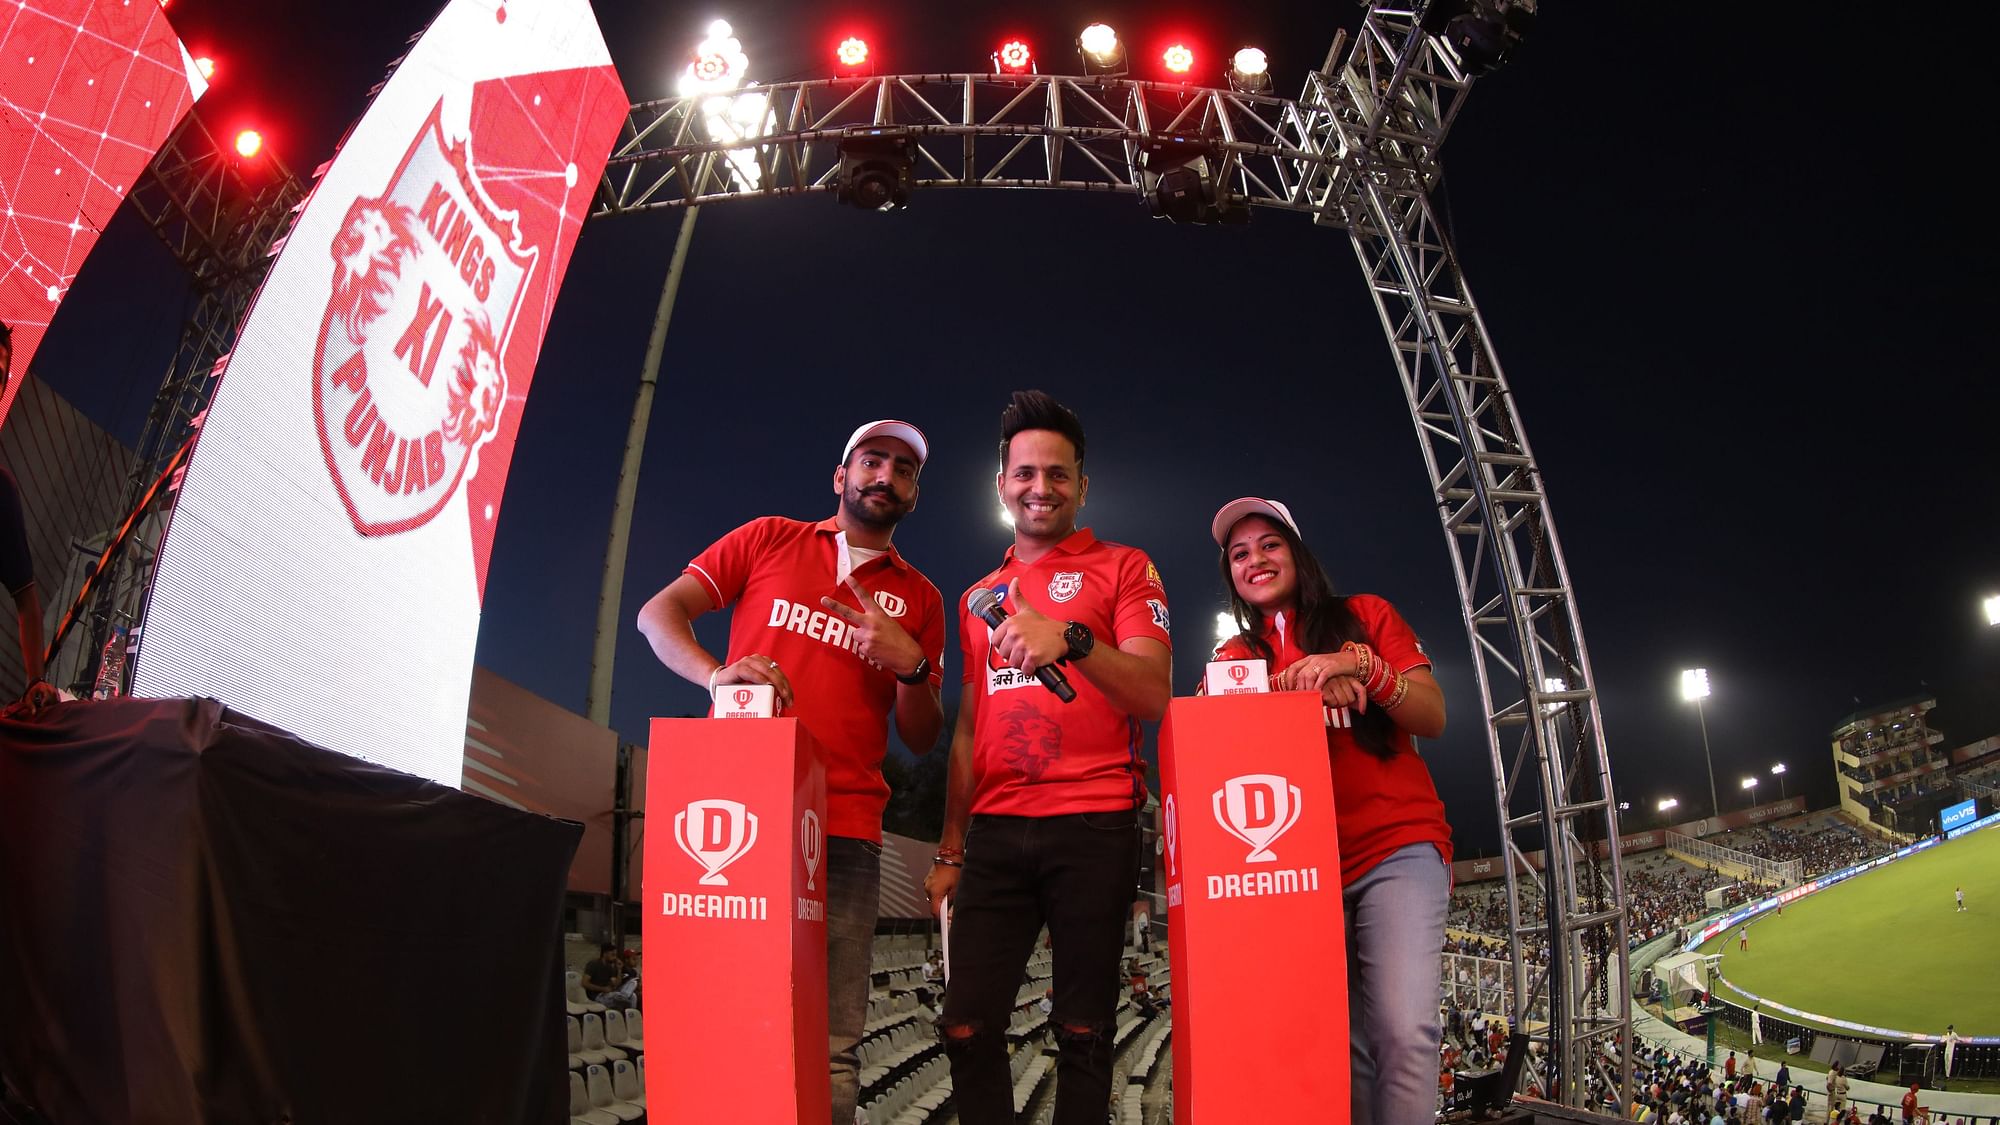 Fantasy cricket app Dream11 has bagged IPL’s title sponsorship deal for Rs 222 crore.